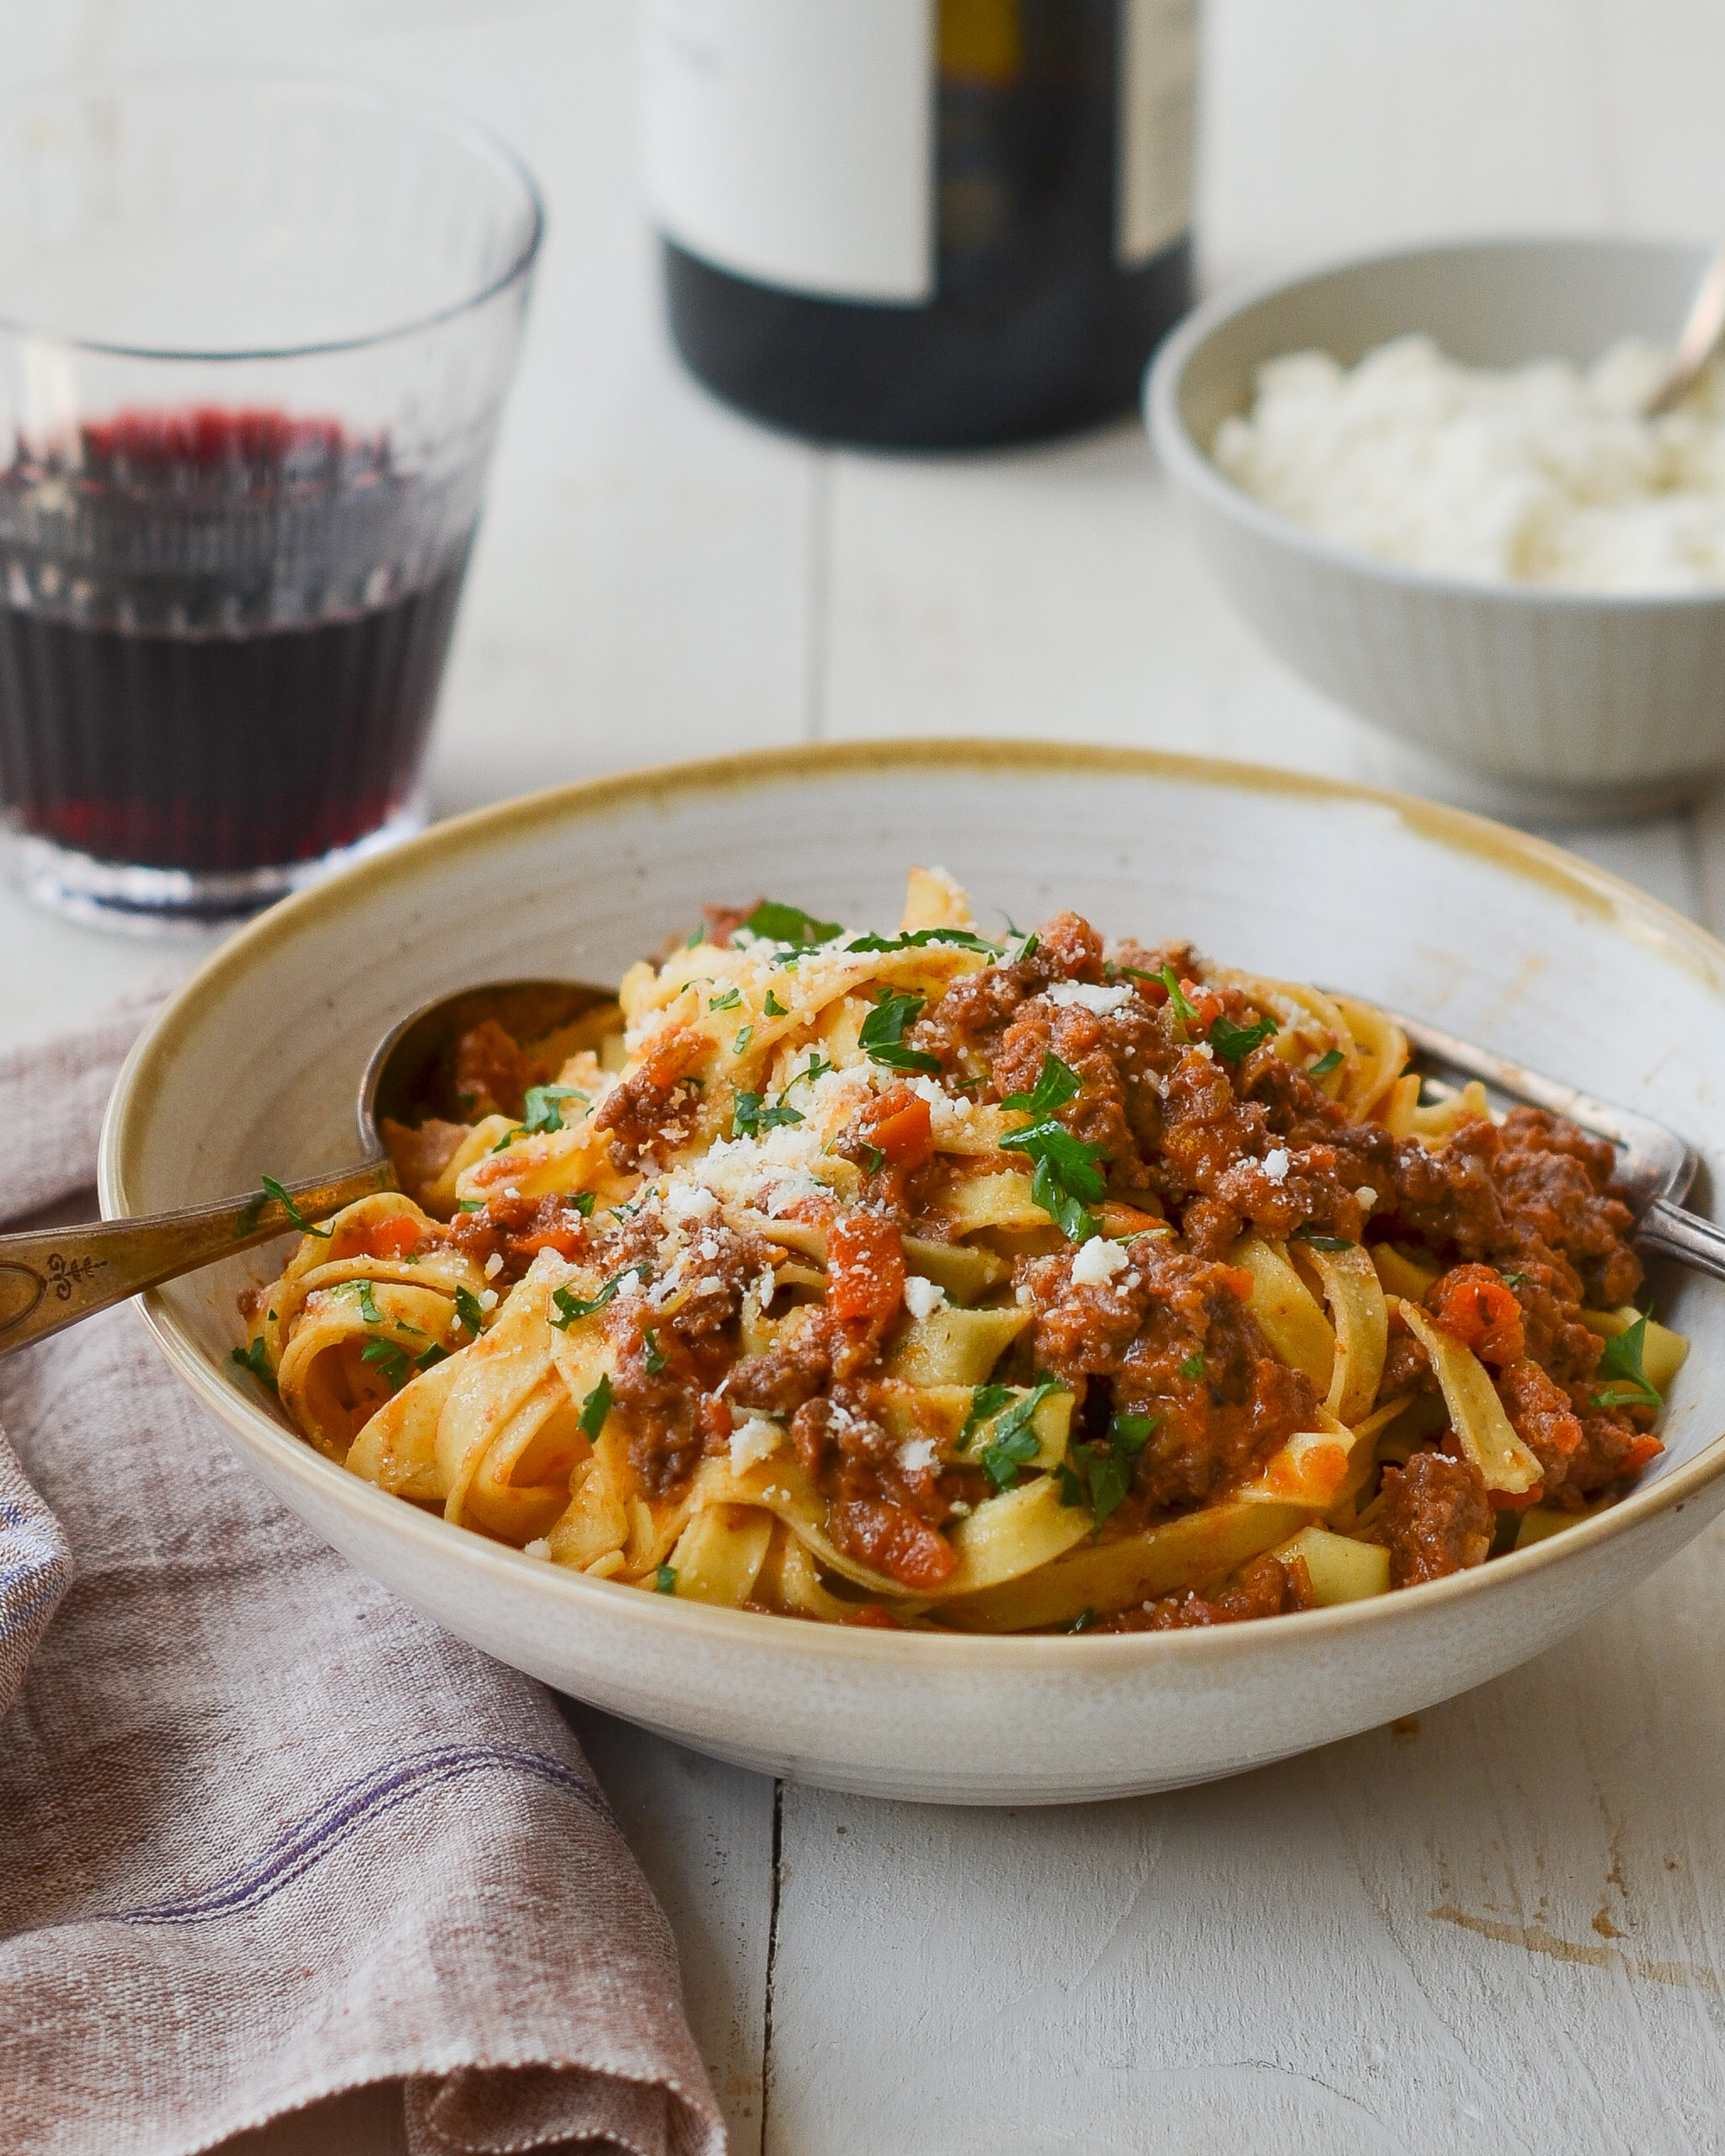 Linguine with Bolognese Sauce - Recipes For Holidays